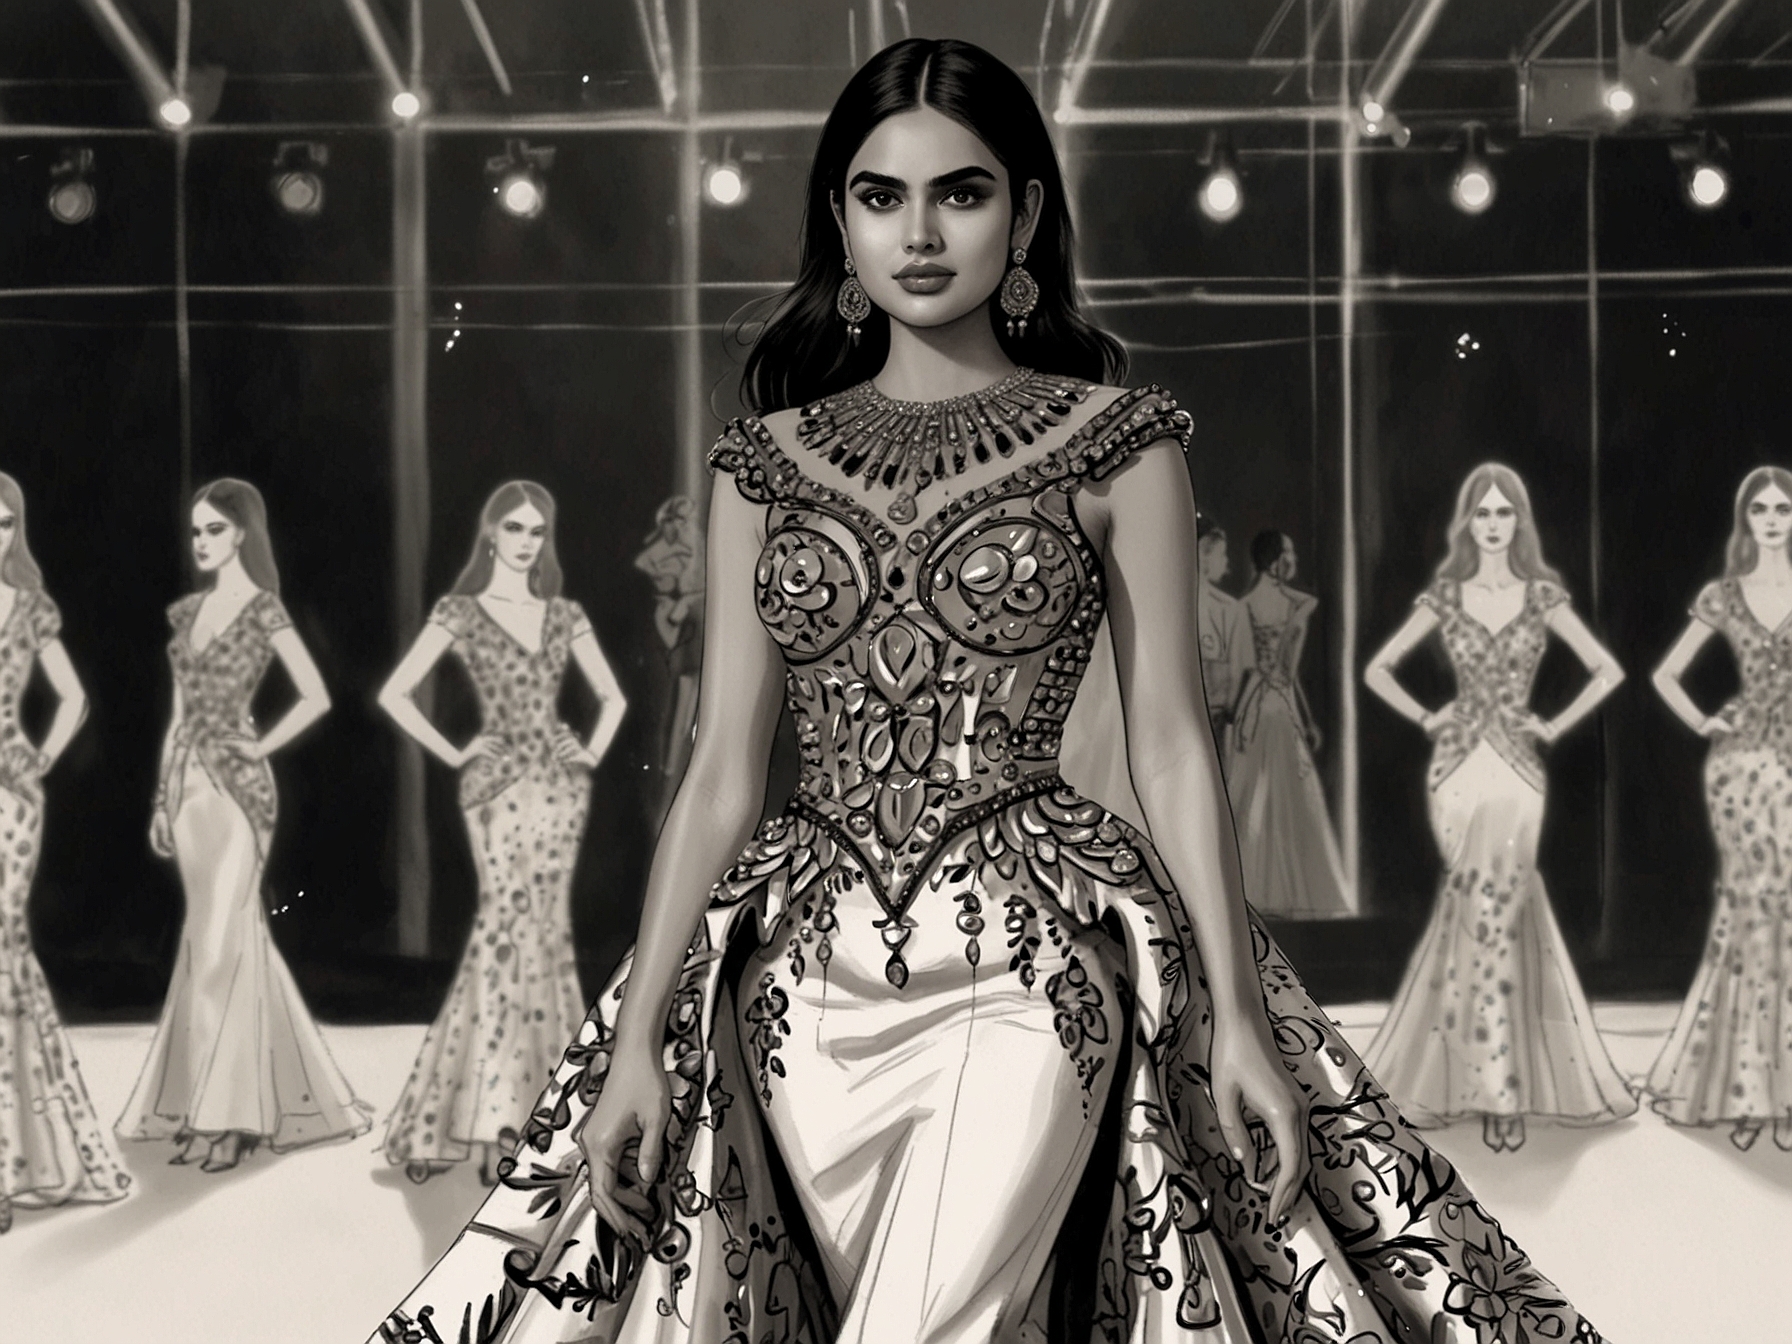 Isha Ambani stuns in a monochrome Schiaparelli gown, complemented by Schiaparelli Robot Babies adorned with Swarovski crystals, reflecting the brand's boundary-pushing aesthetic.